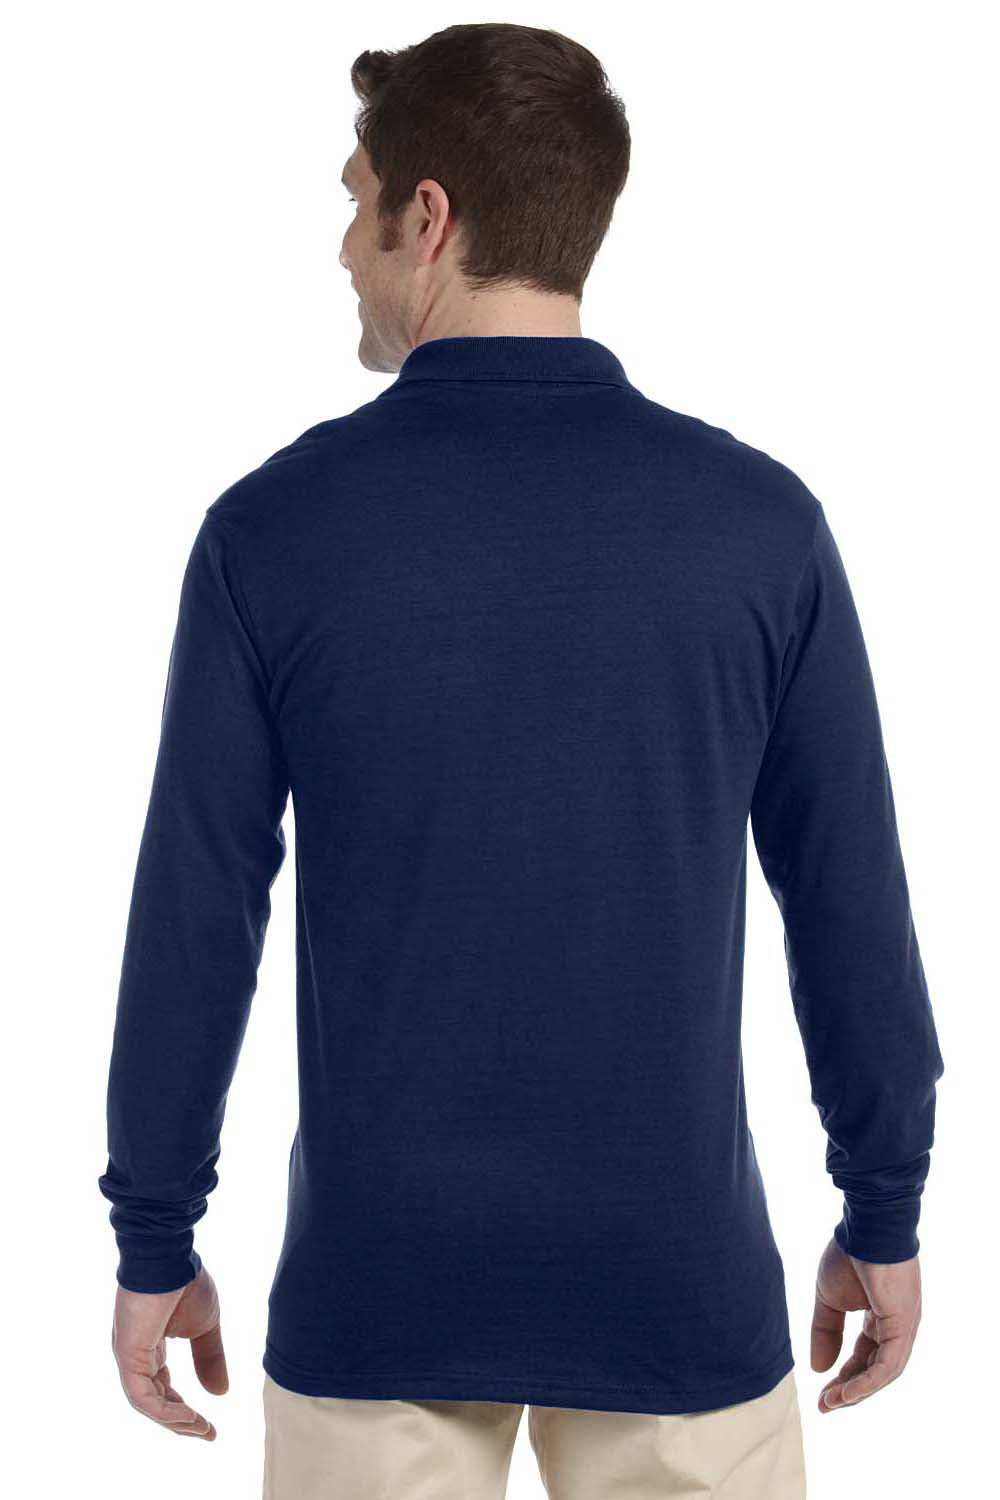 Jerzees 437ML Mens SpotShield Stain Resistant Long Sleeve Polo Shirt Navy Blue Back